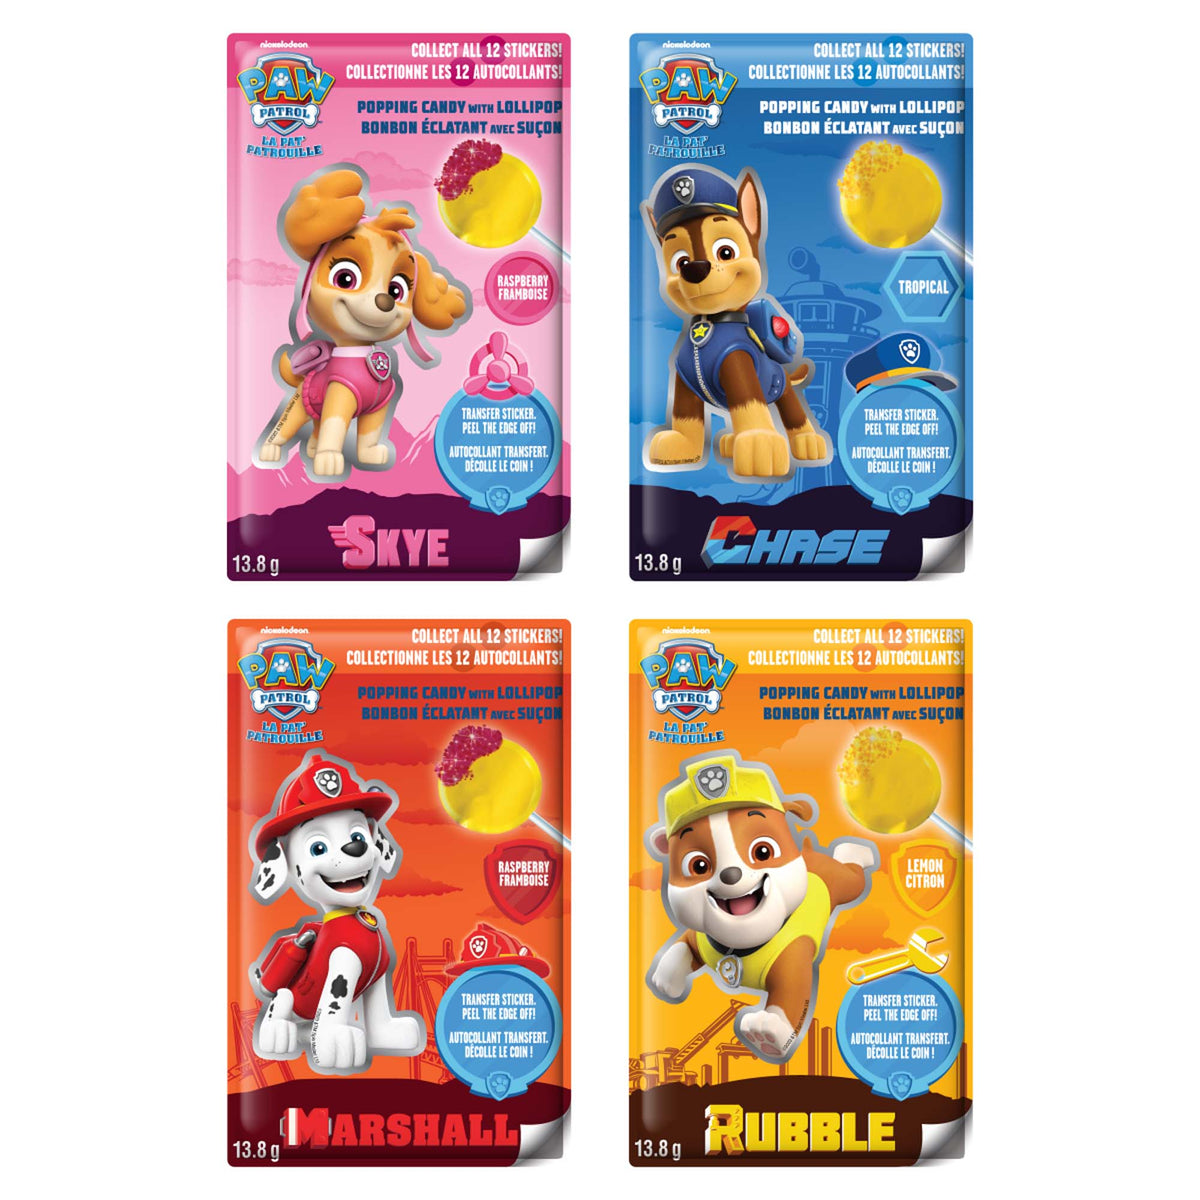 REGAL CONFECTION INC. impulse buying Paw Patrol Popping Candy with Lollipop and Sticker, 13.8 g, Assortment, 1 Count